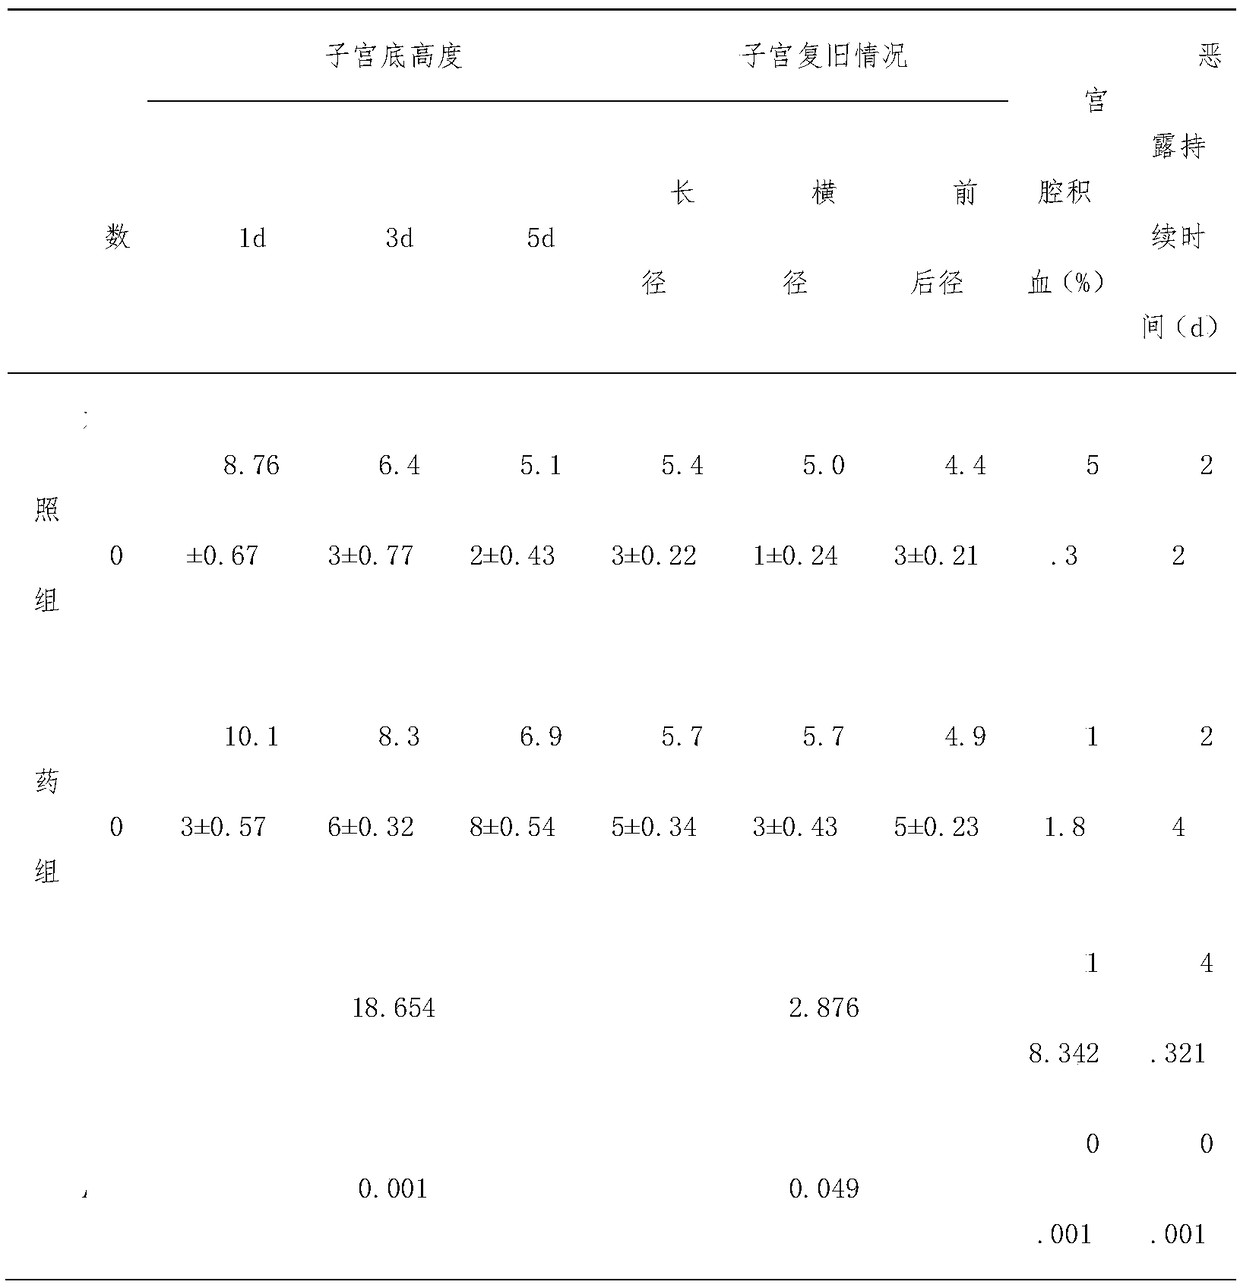 Research method for promoting postpartum uterine involution by combining traditional Chinese medicine prescription and postpartum rehabilitation instrument